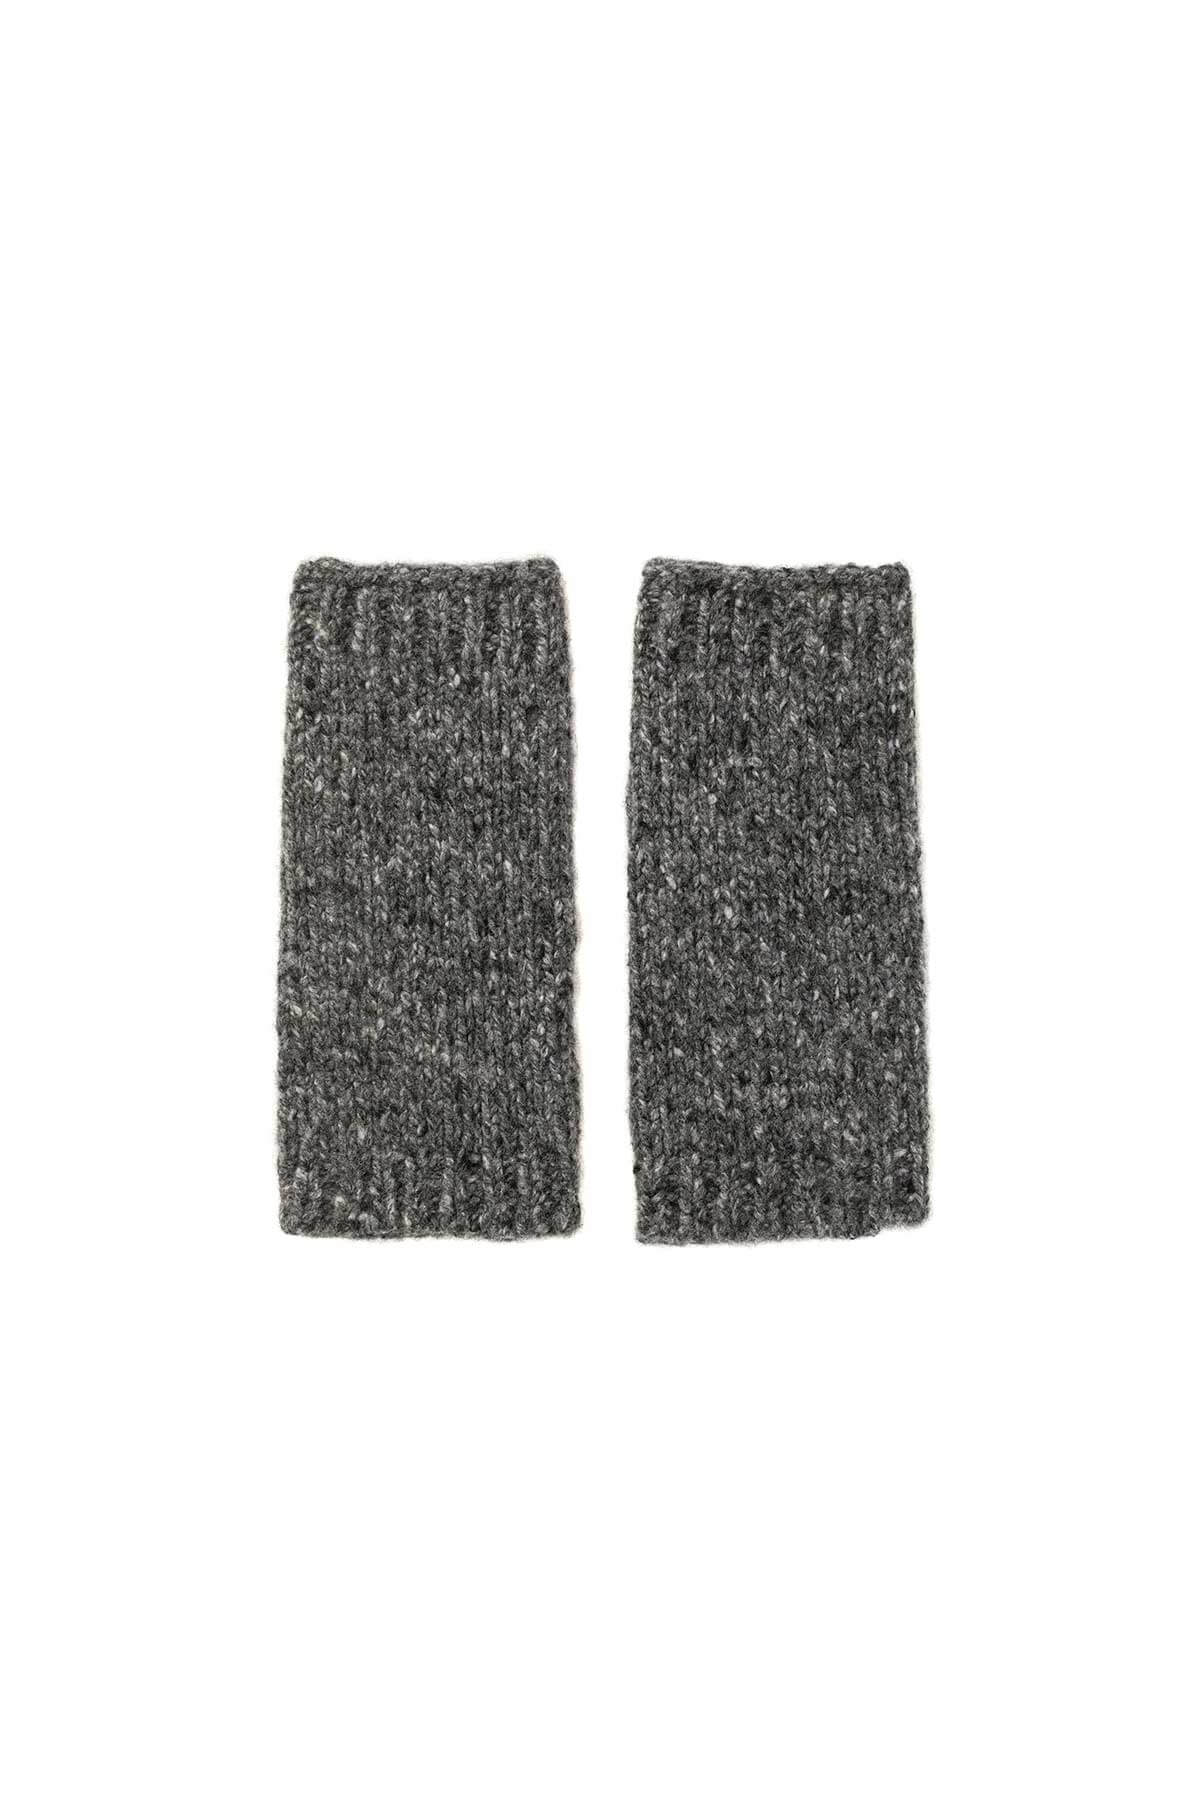 Johnstons of Elgin Donegal Cashmere Wrist Warmers in Mid Grey on a white background HAC03255HA7161ONE